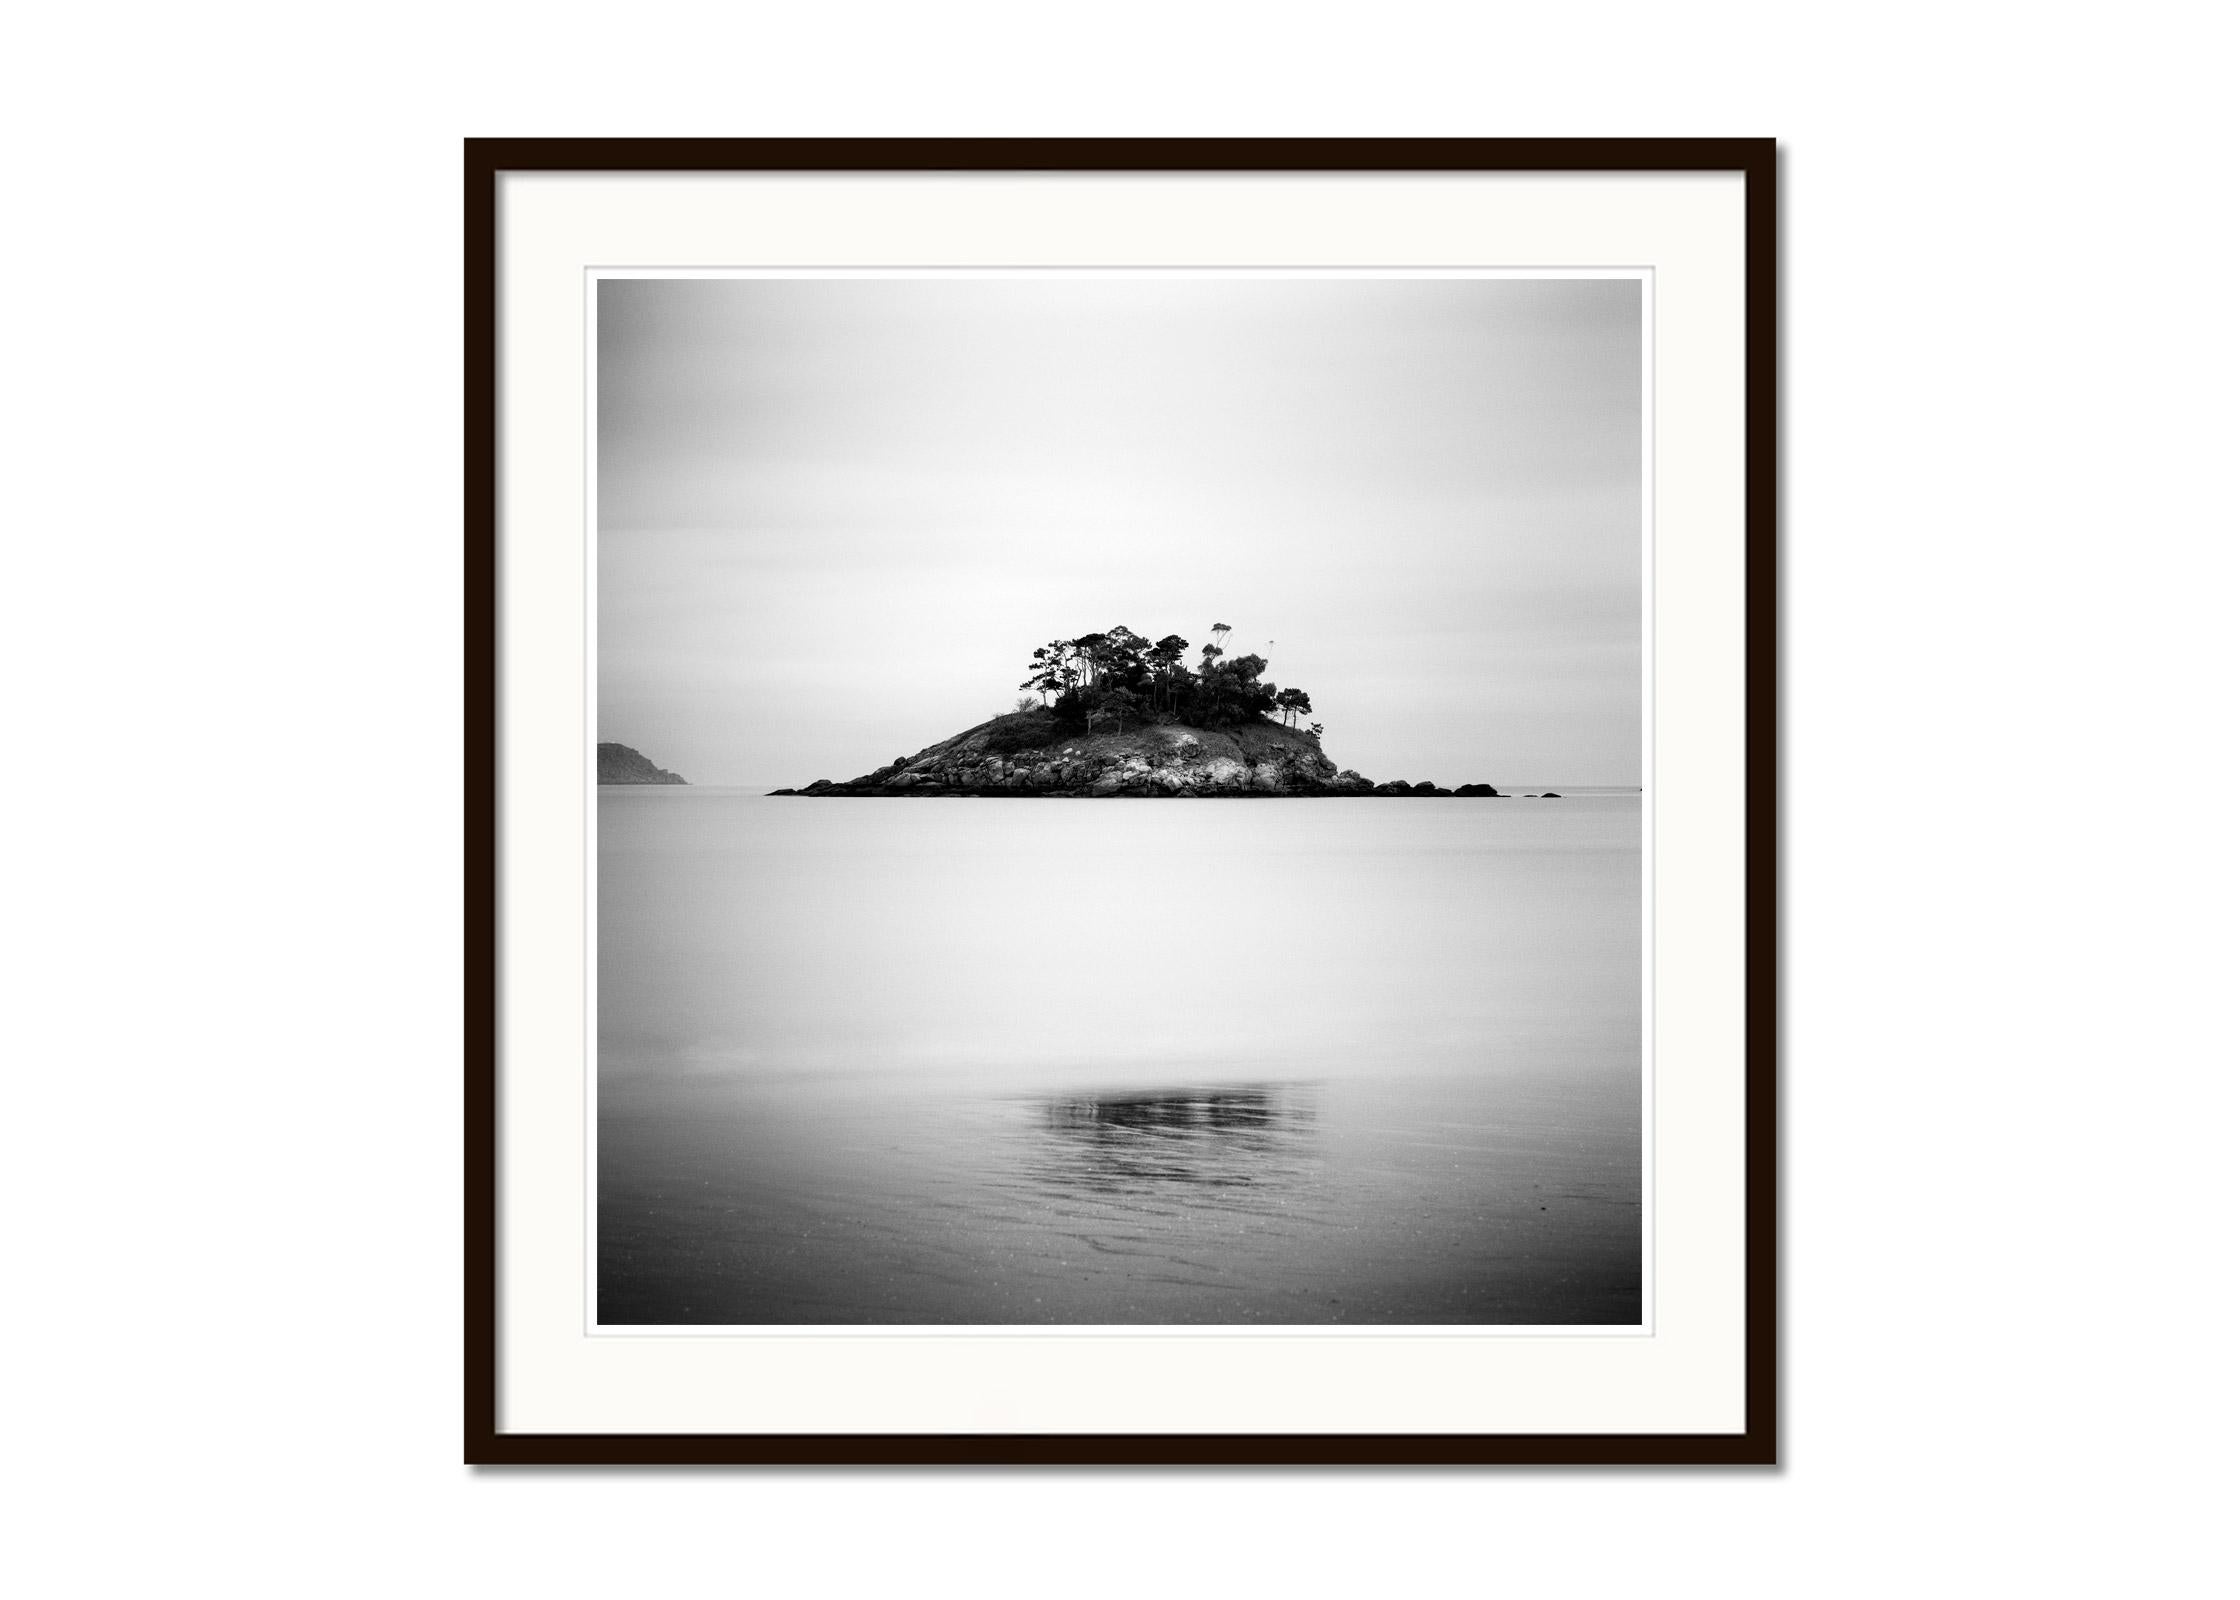 Little Green Island, beach, Spain, black and white fineart landscape photography - Contemporary Photograph by Gerald Berghammer